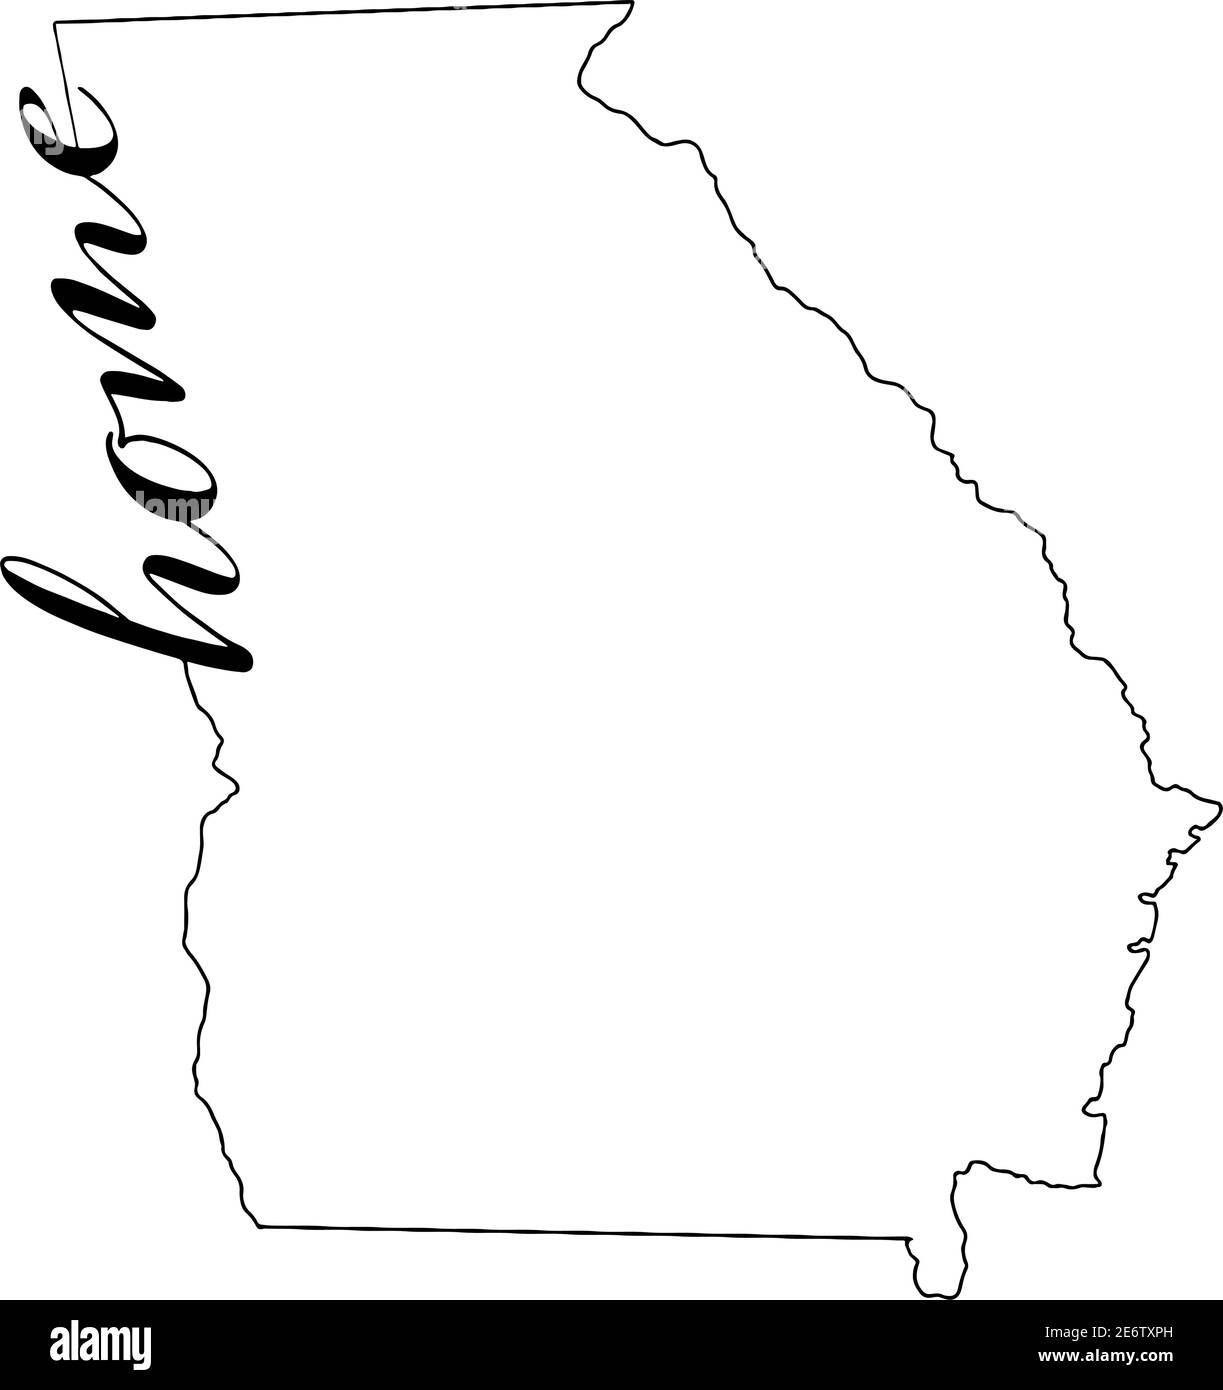 Georgia state map outline with the word home written in the outline Stock Vector